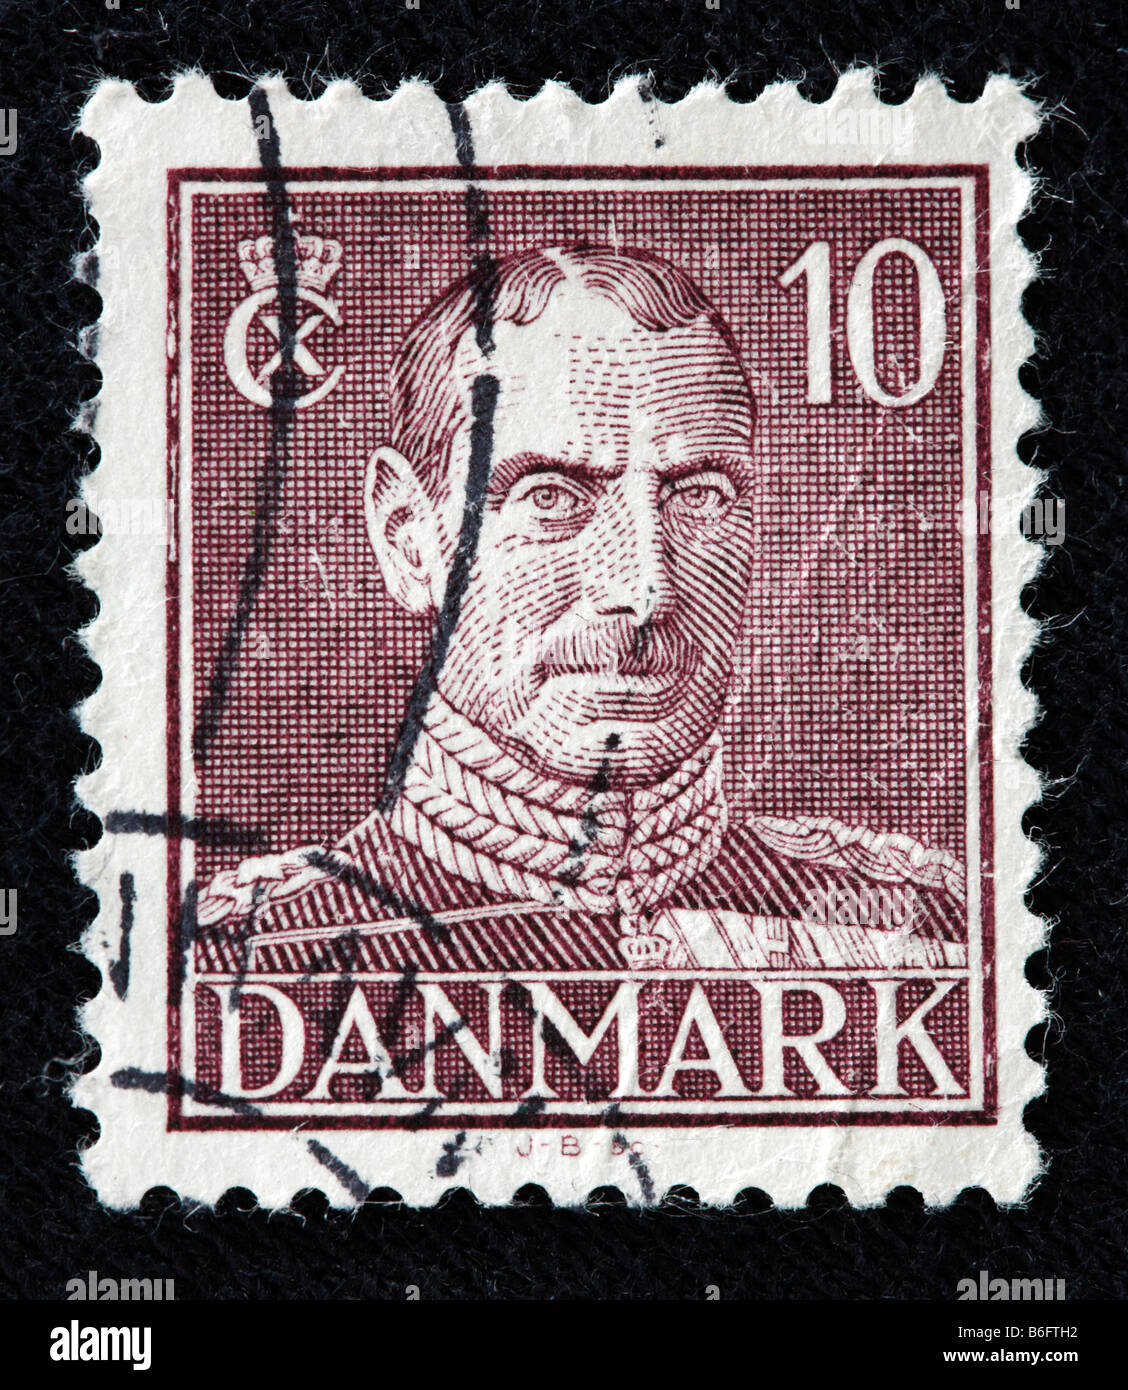 Christian X, King of Denmark and Iceland (1912-1947), postage stamp, Denmark Stock Photo